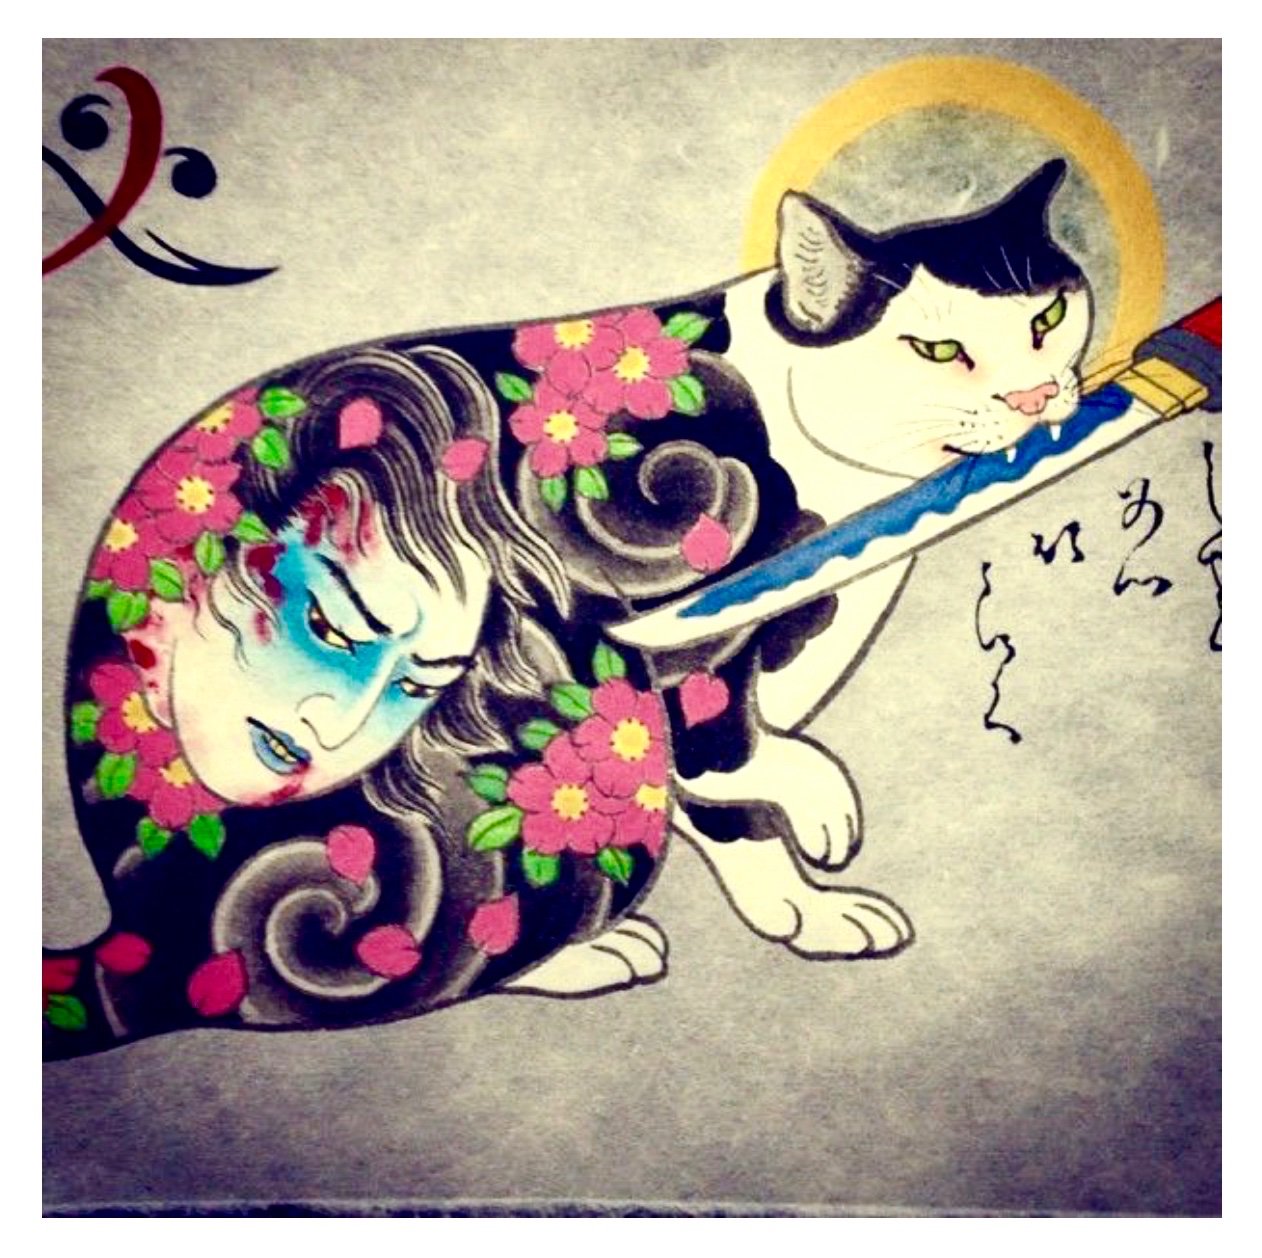 Karen Lee Street Monmon Cats Tattoo Designs By Contemporary Japanese Artist Kazuaki Horitomo Kitamura That Combine His Love Of Cats With Buddhist Motifs Japanese Legends Mythical Figures Fiendsandghouls Caturday